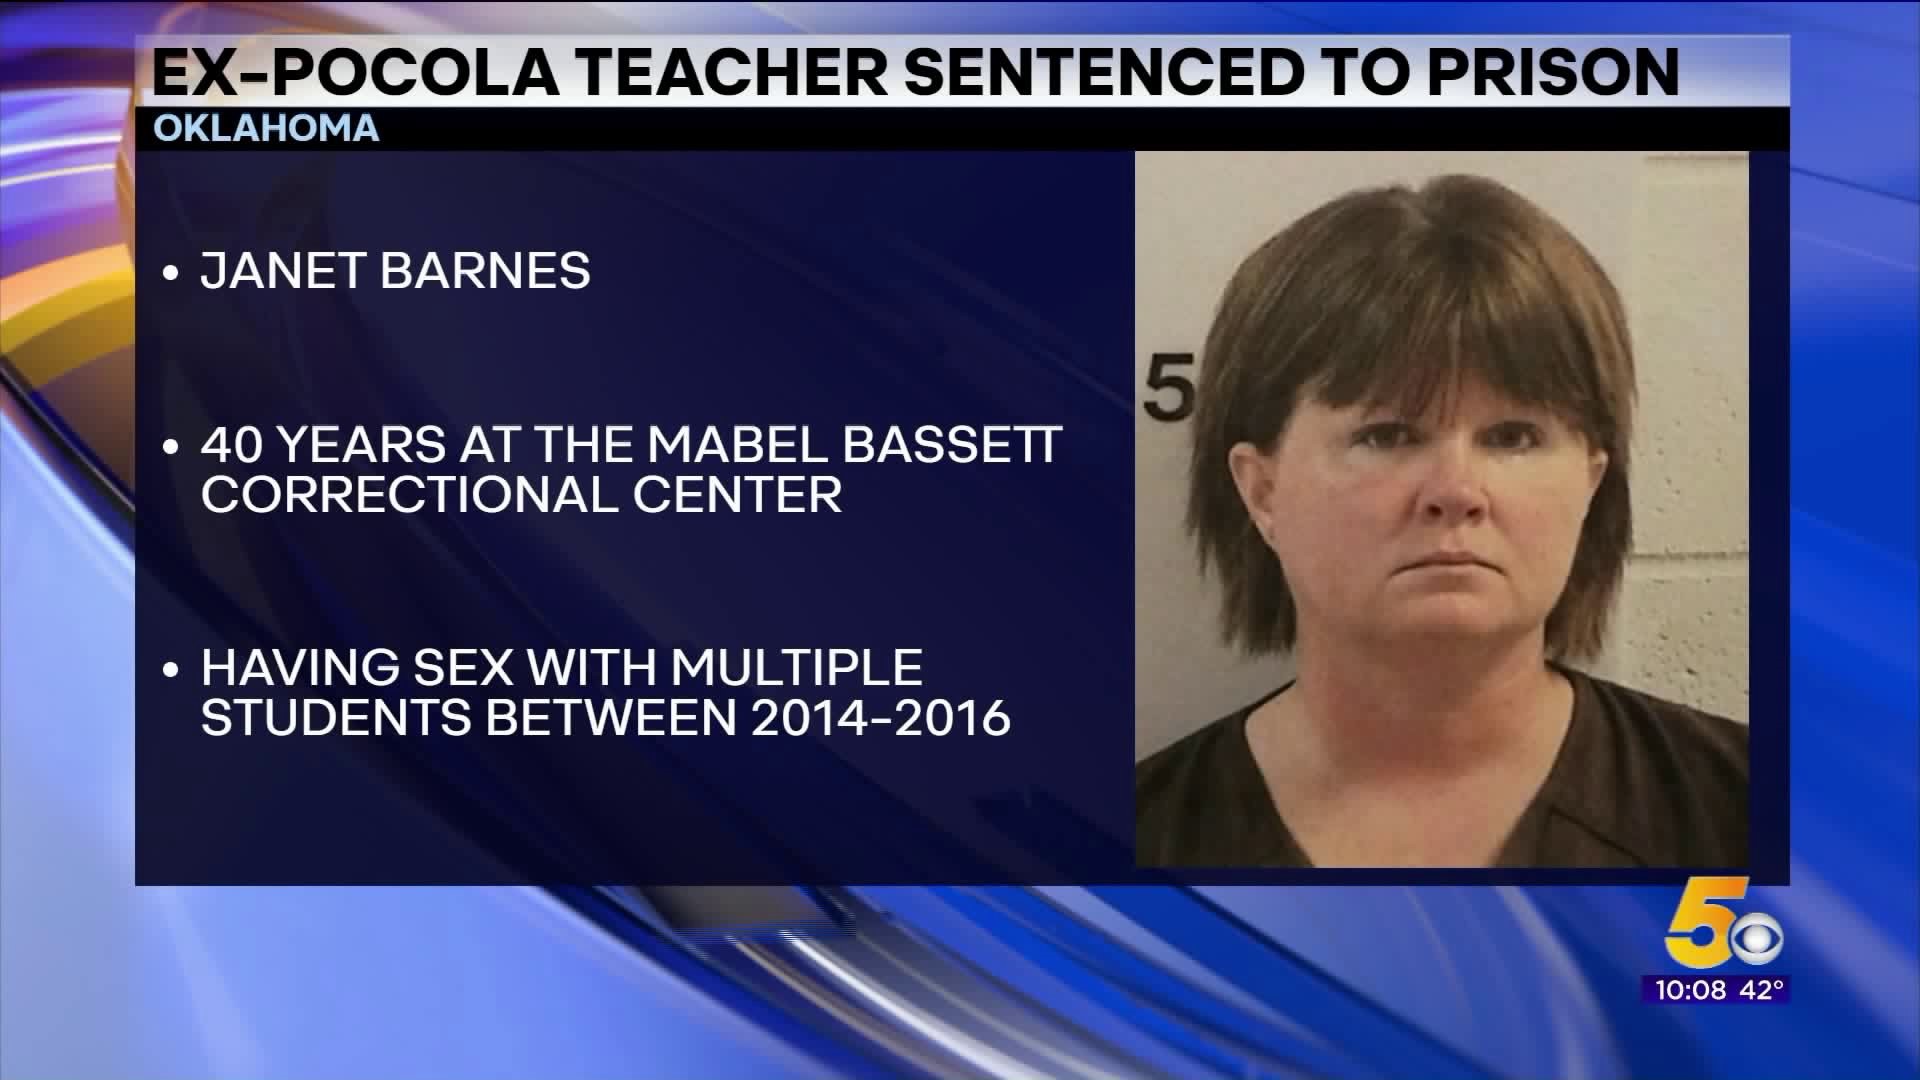 Ex-Pocola Teacher Sentenced To 40 Years In Prison For Sex With Students